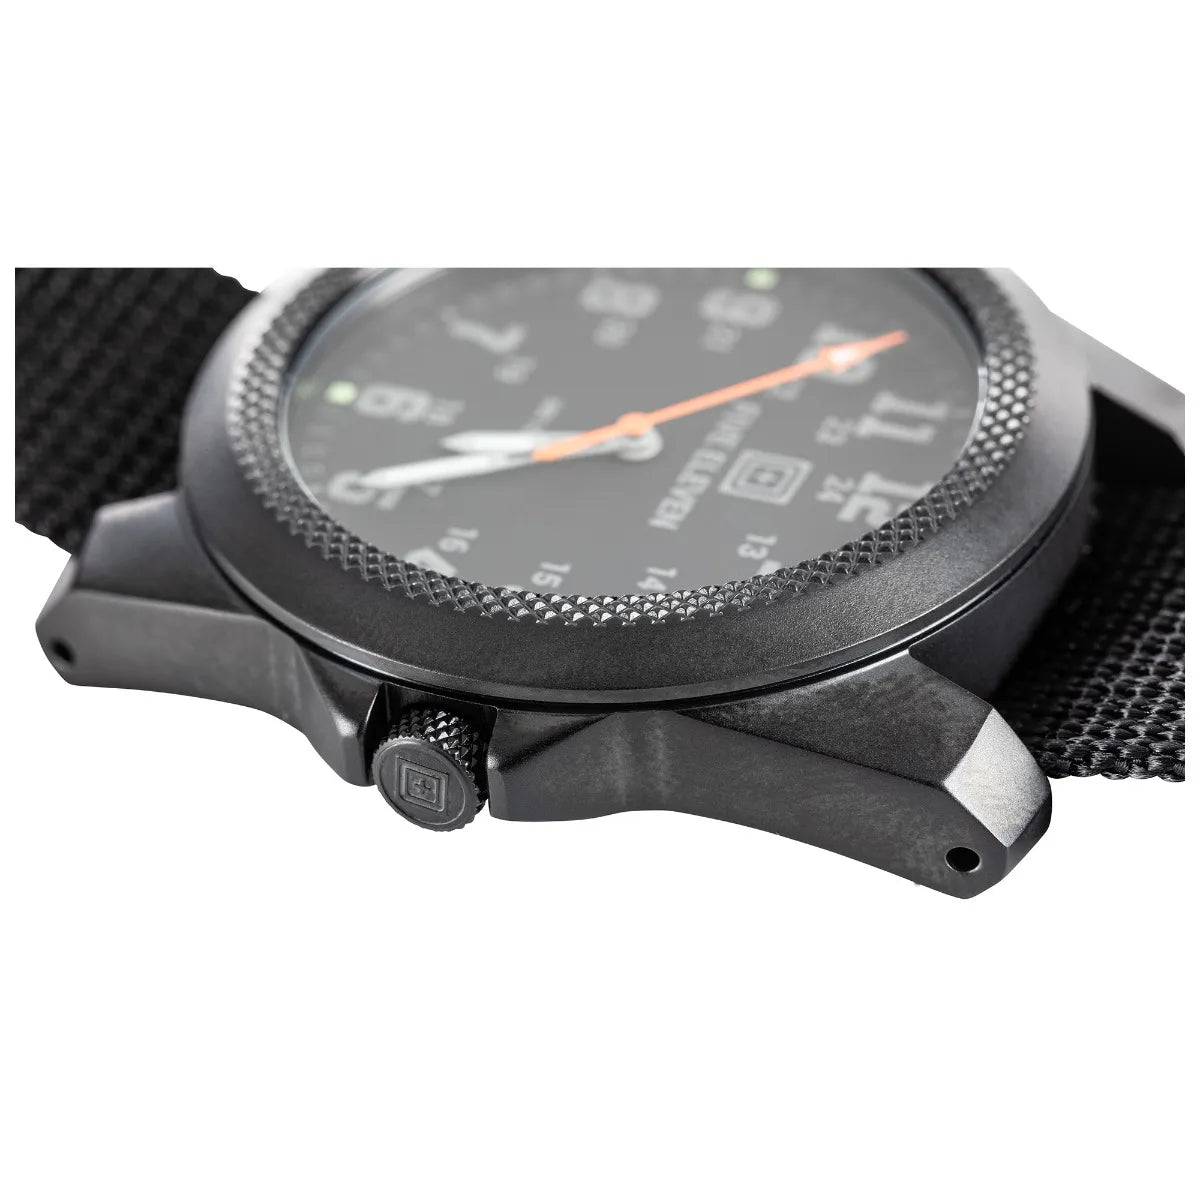 5.11 Tactical Pathfinder Watch 56623 - Clothing & Accessories